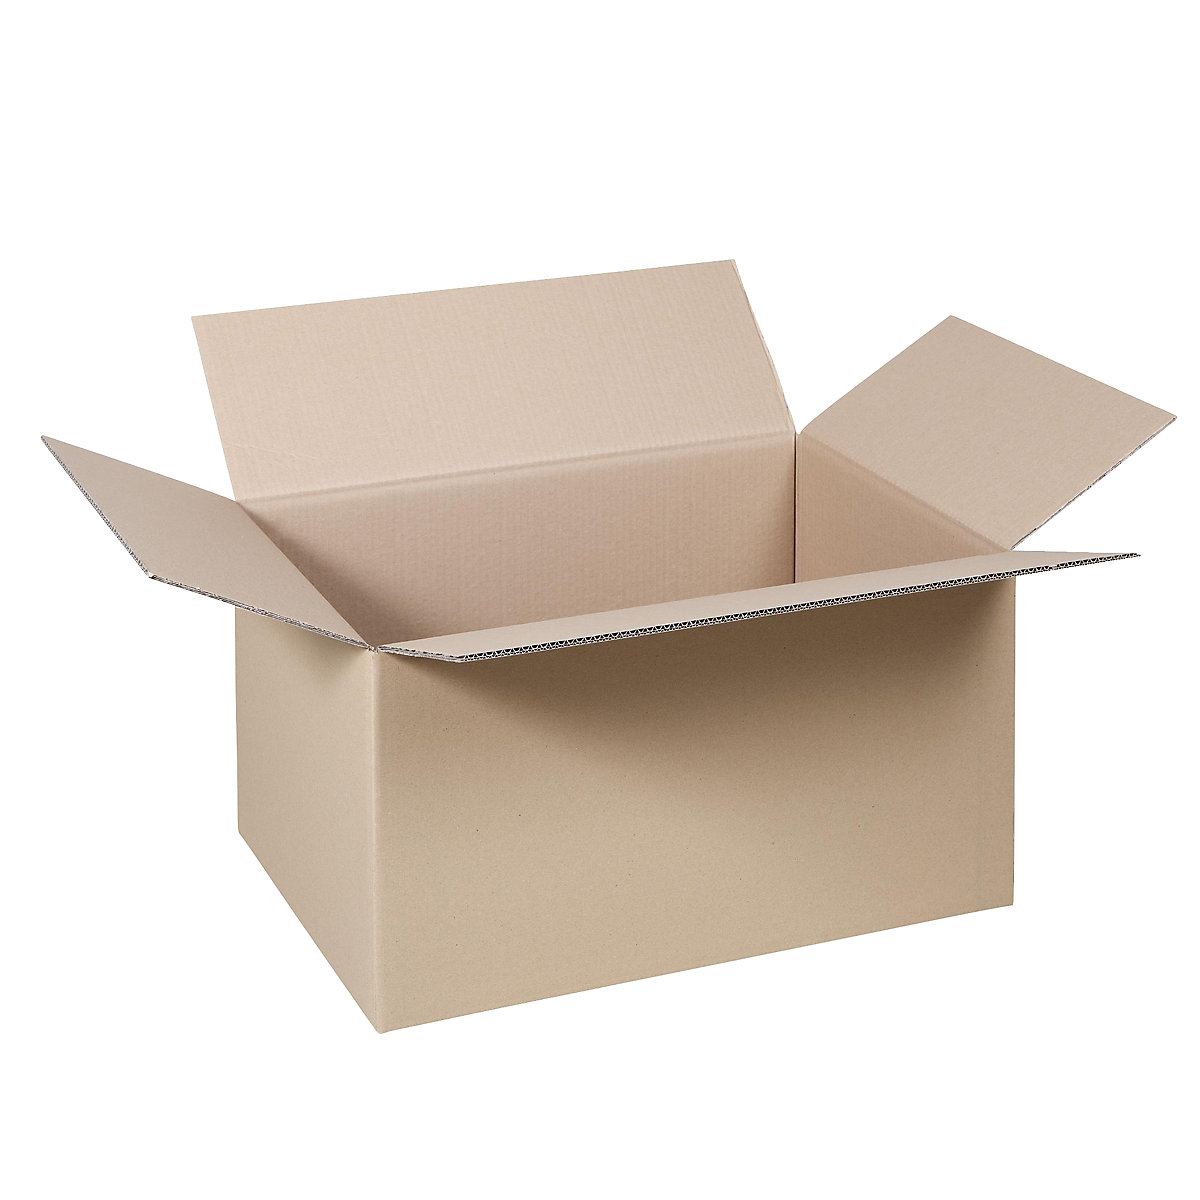 Folding cardboard box, FEFCO 0201, made of double fluted cardboard, internal dimensions 800 x 600 x 500 mm, pack of 50-49